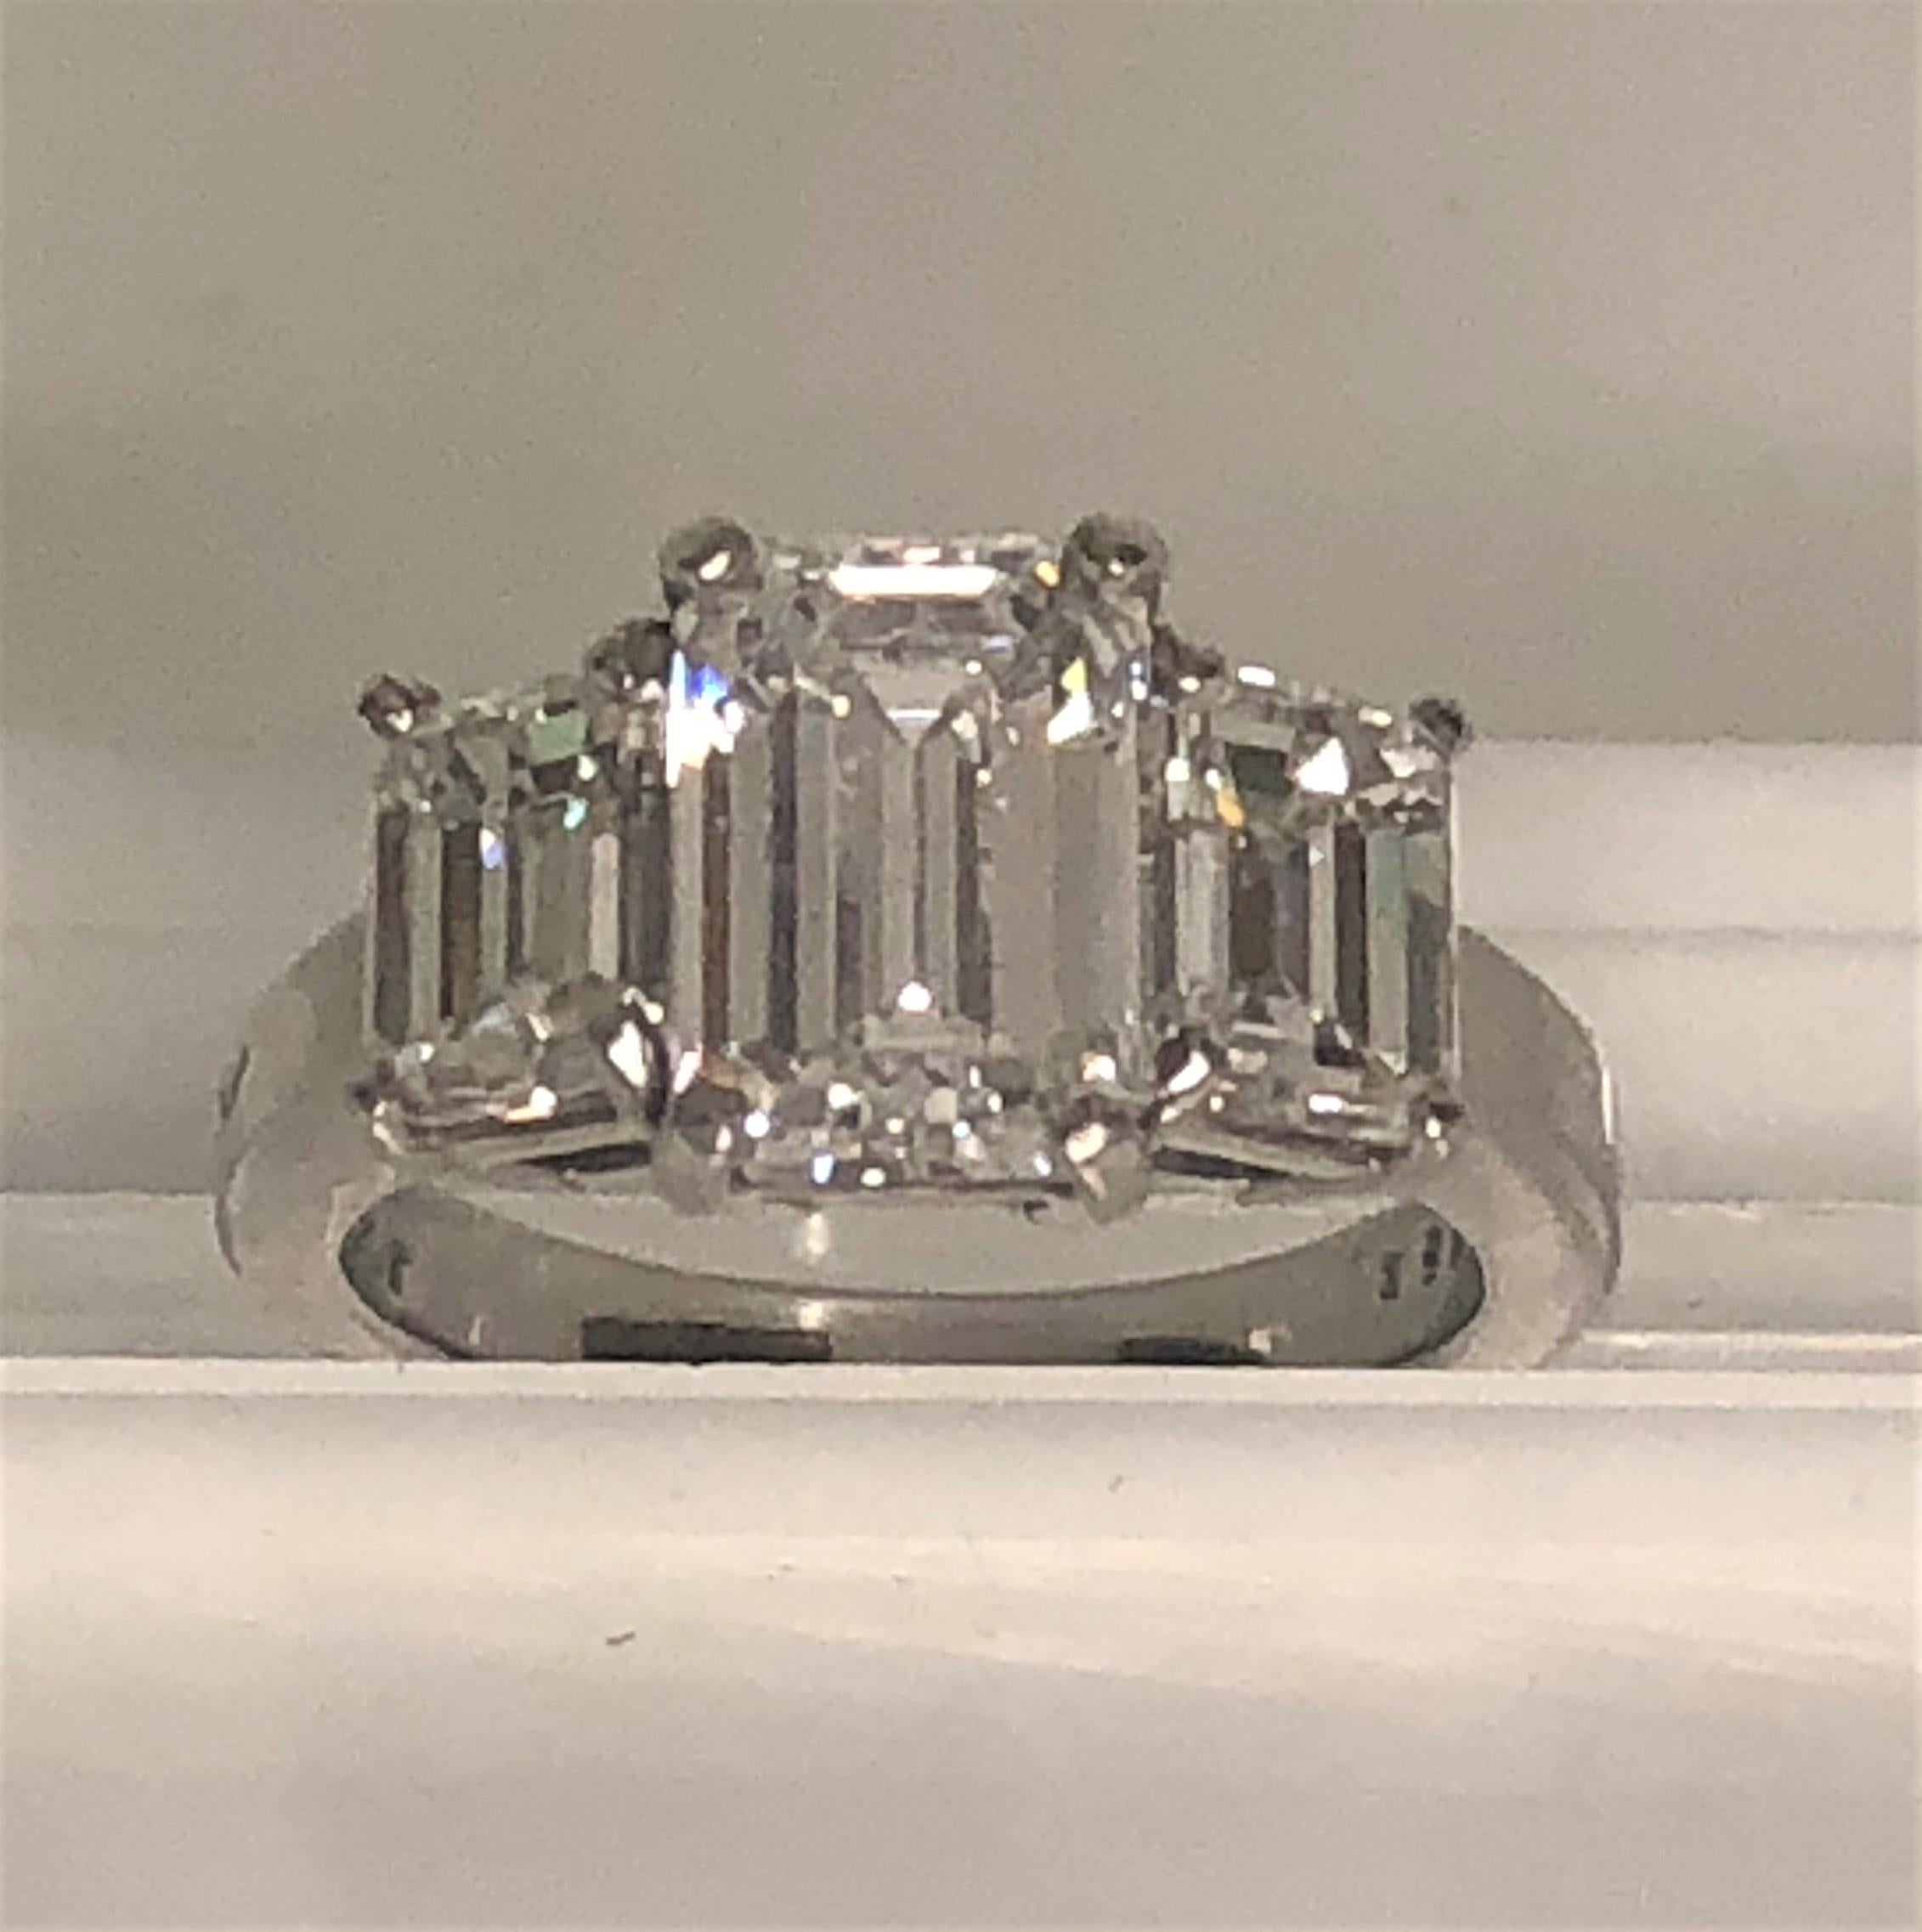 The ring SPARKLES!!  
Three near colorless emerald cut, prong set diamonds.
Center diamond is approximately 2.06 ct, VS2 clarity, E color (colorless!) with GIA certificate.
Side diamonds are approximately .80 ct each, VS-SI clarity, E-F color.
Band